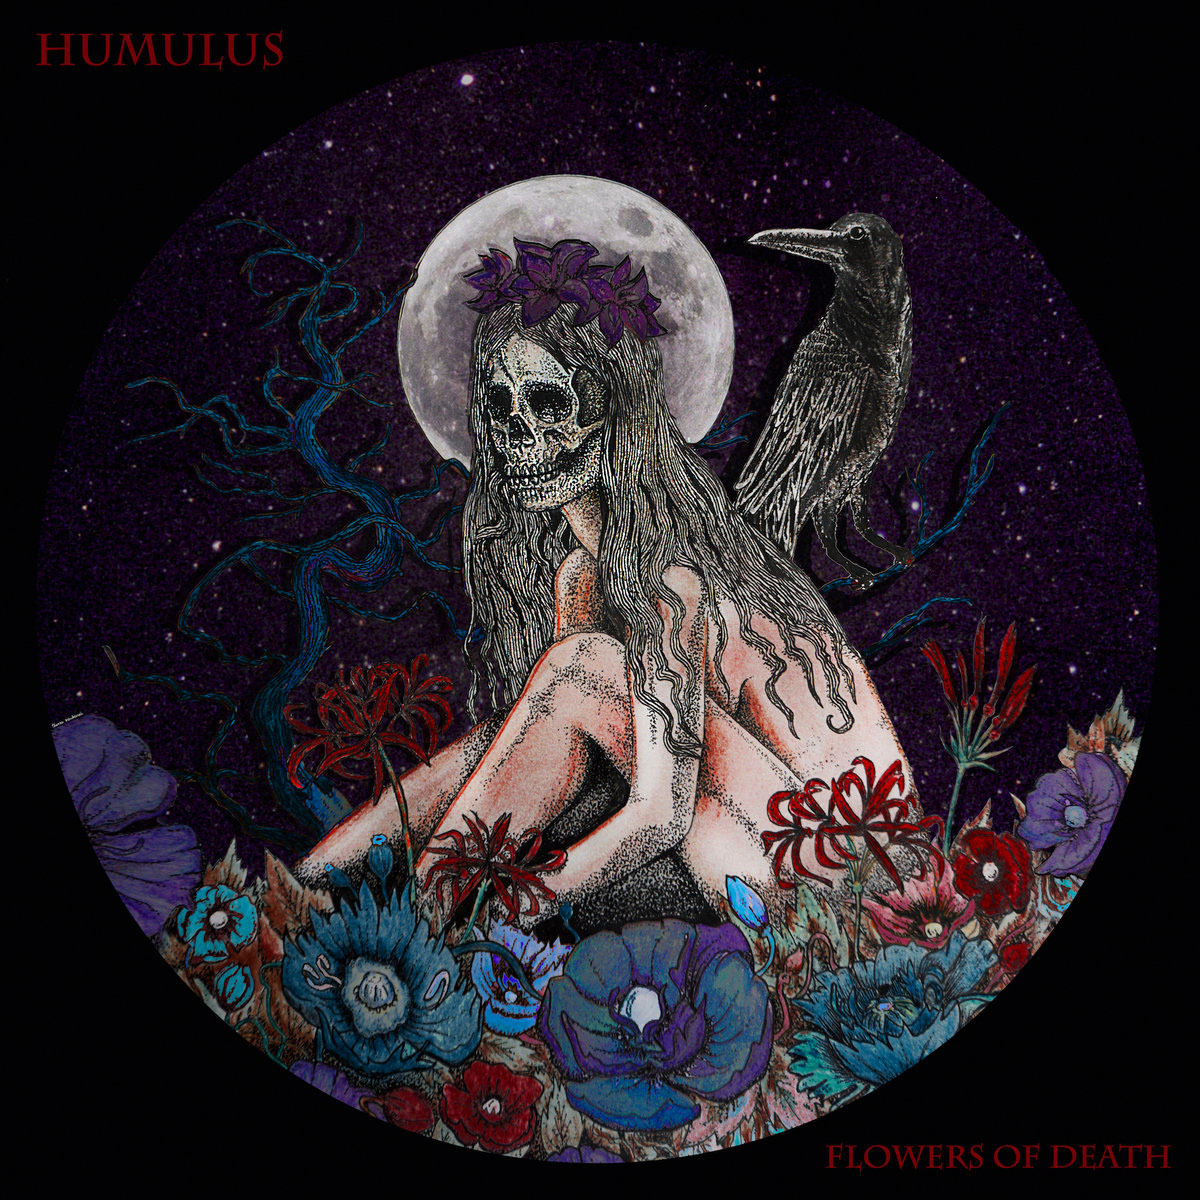 Flowers of Death by Humulus